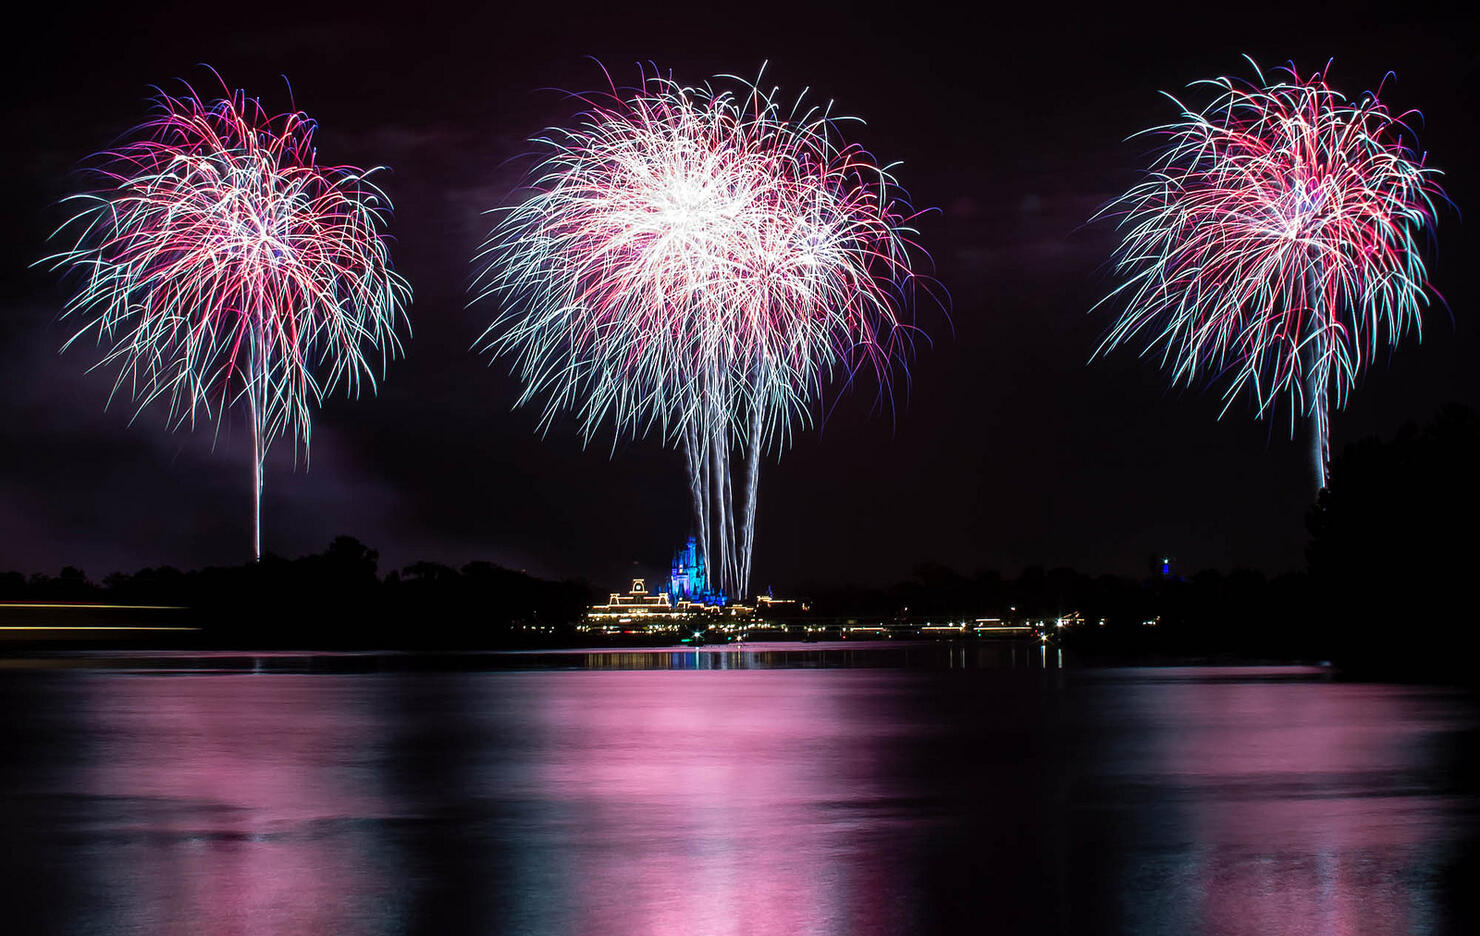 July 4th Celebration at the Pier in Disney World